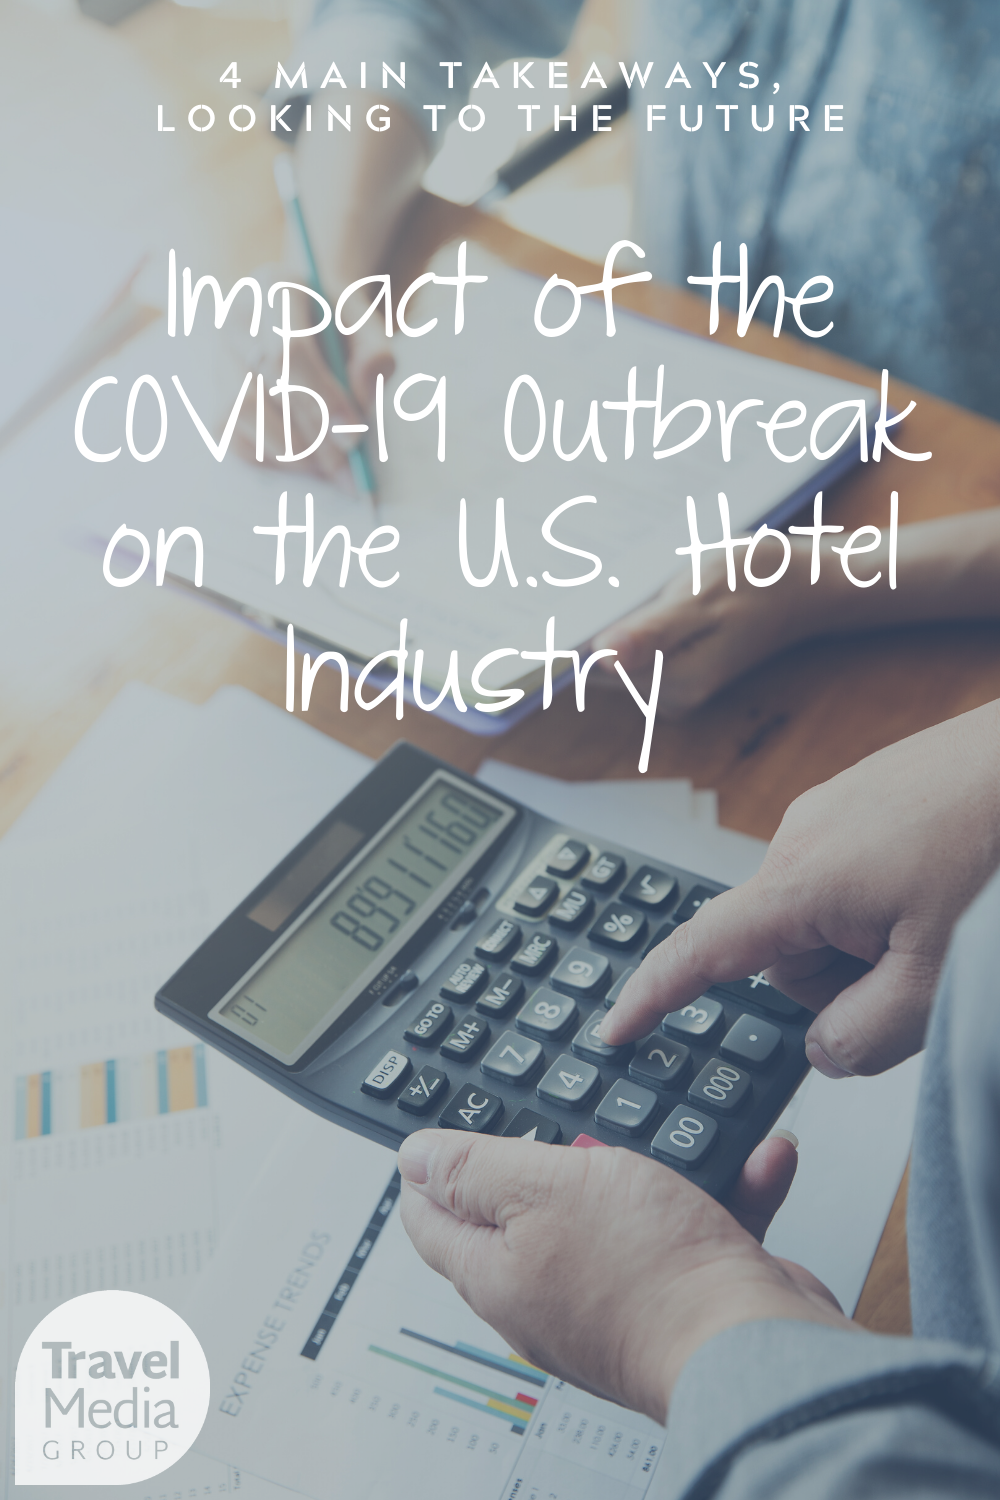 STR delivered a webinar about the impact of COVID-19 on the hotel industry. What do these numbers mean for you, and what outlook do we see for the future? This blog covers both topics in-depth.